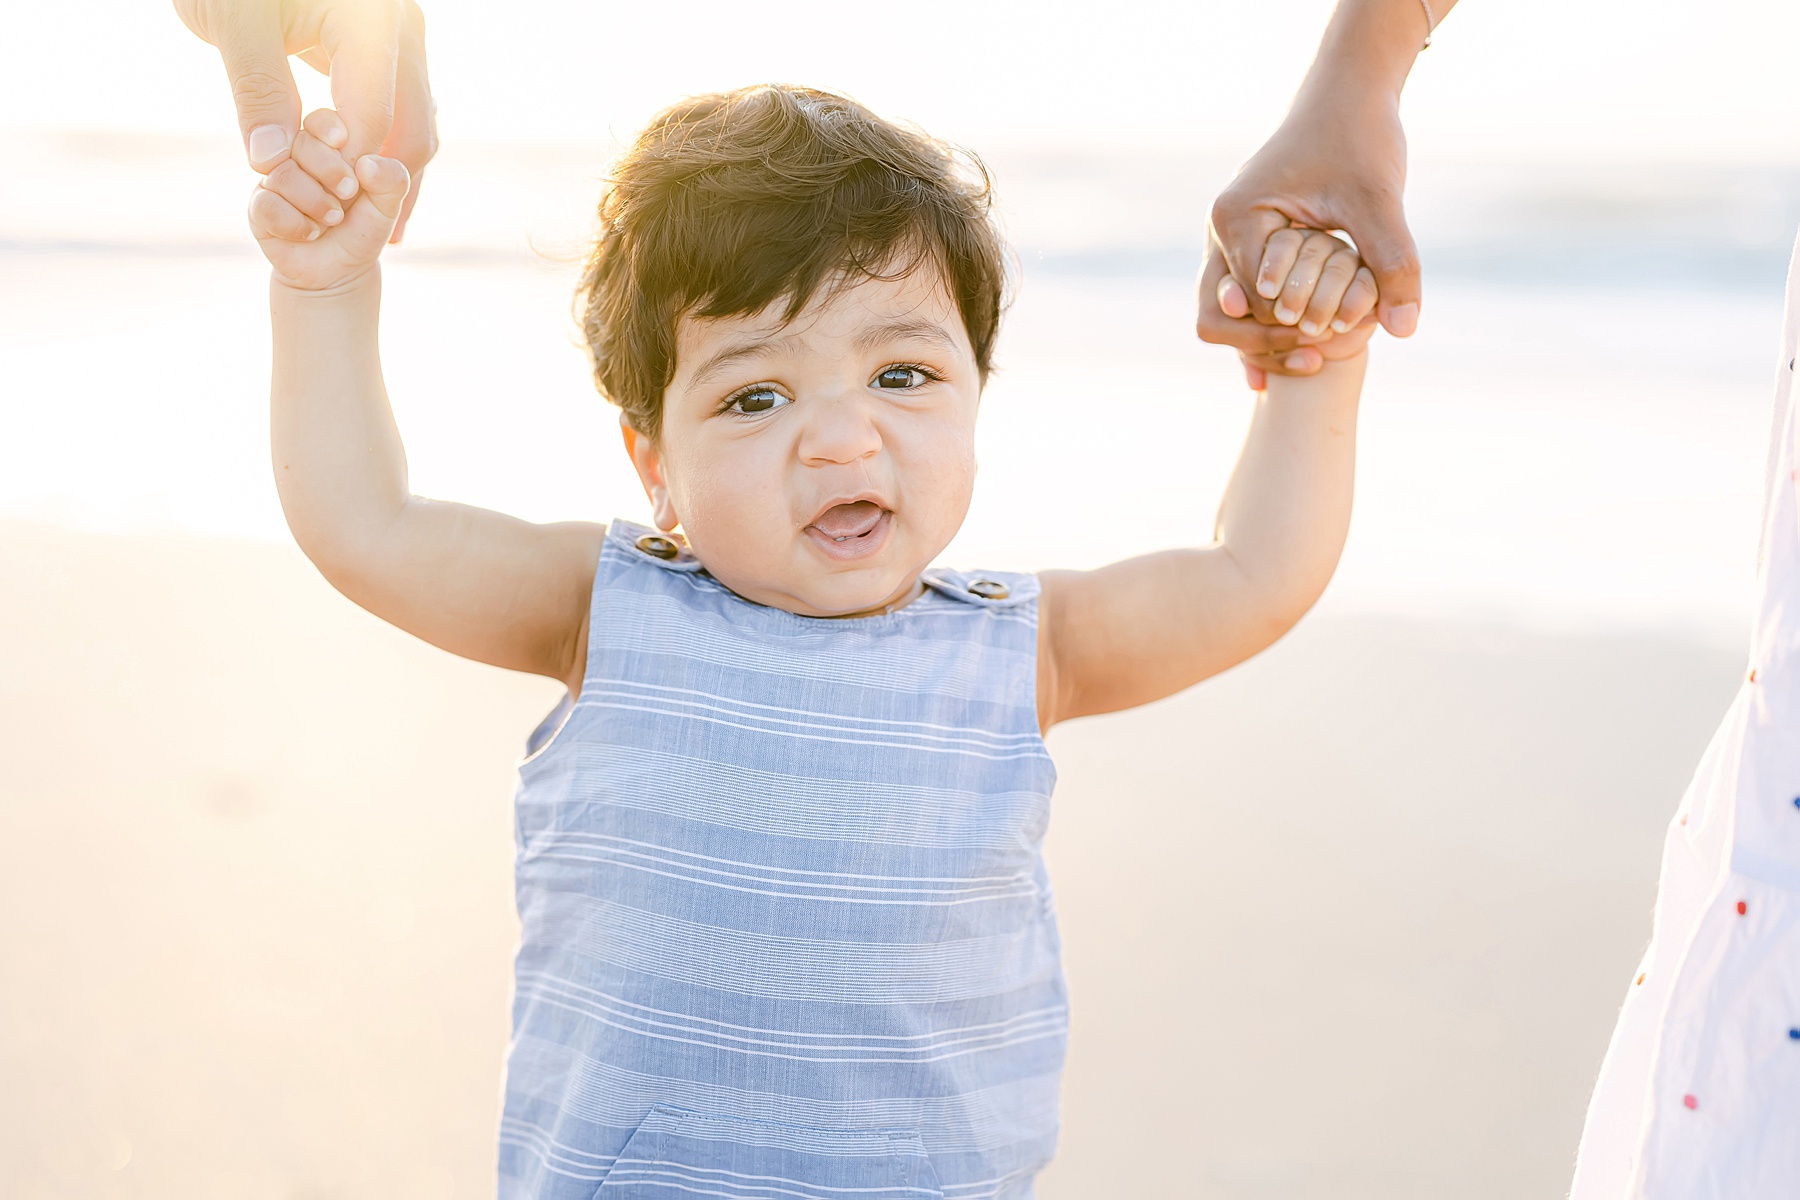 Indian baby boy smiling on beach wearing blue striped overalls